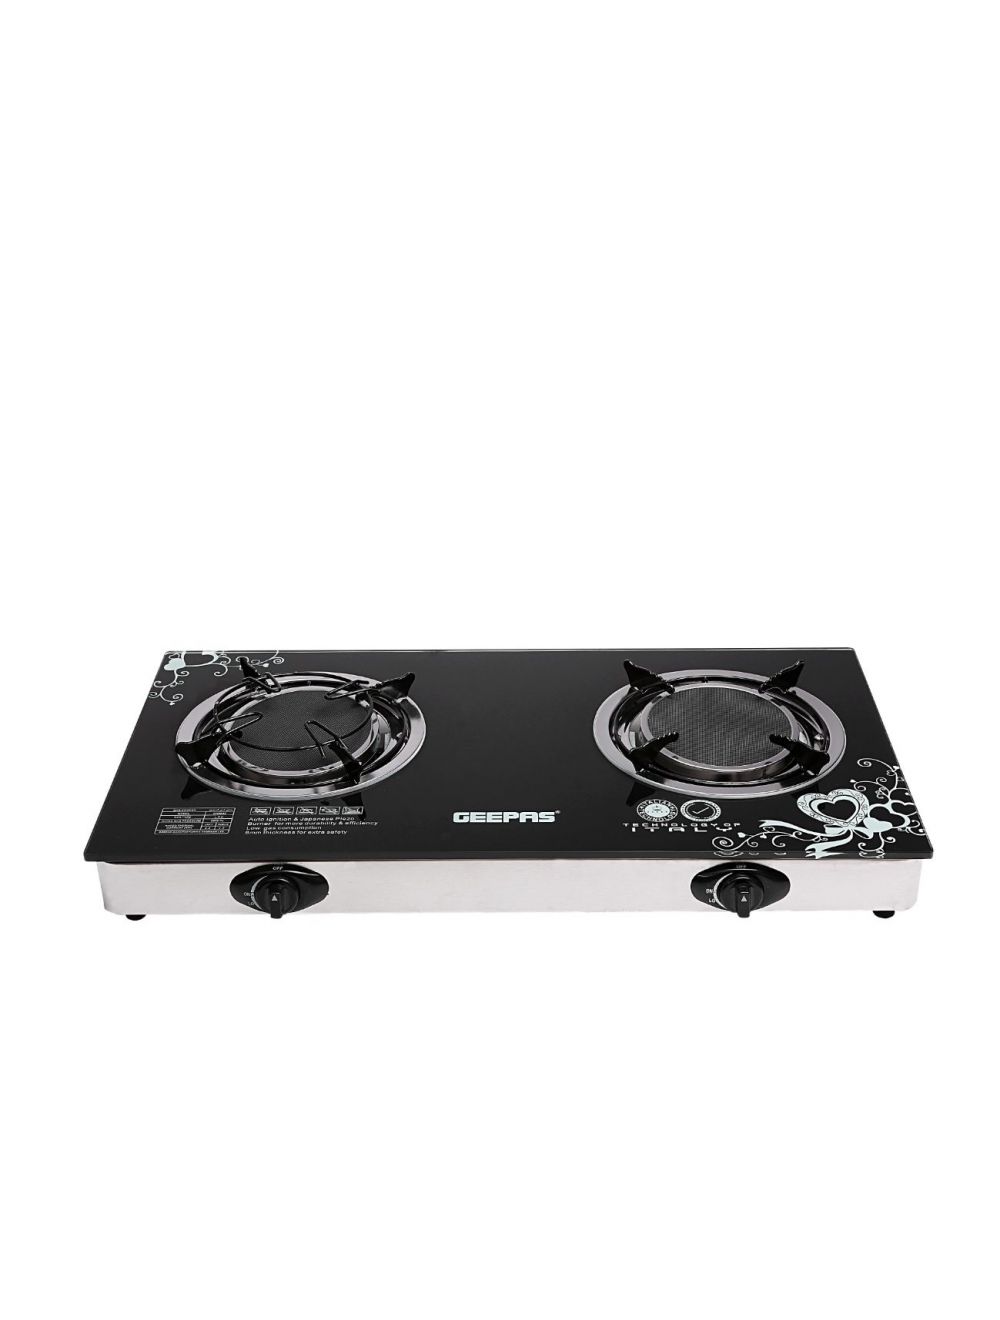 Geepas GK6865 Two Infrared Burner Glass Gas Stove with Stainless Steel Frame